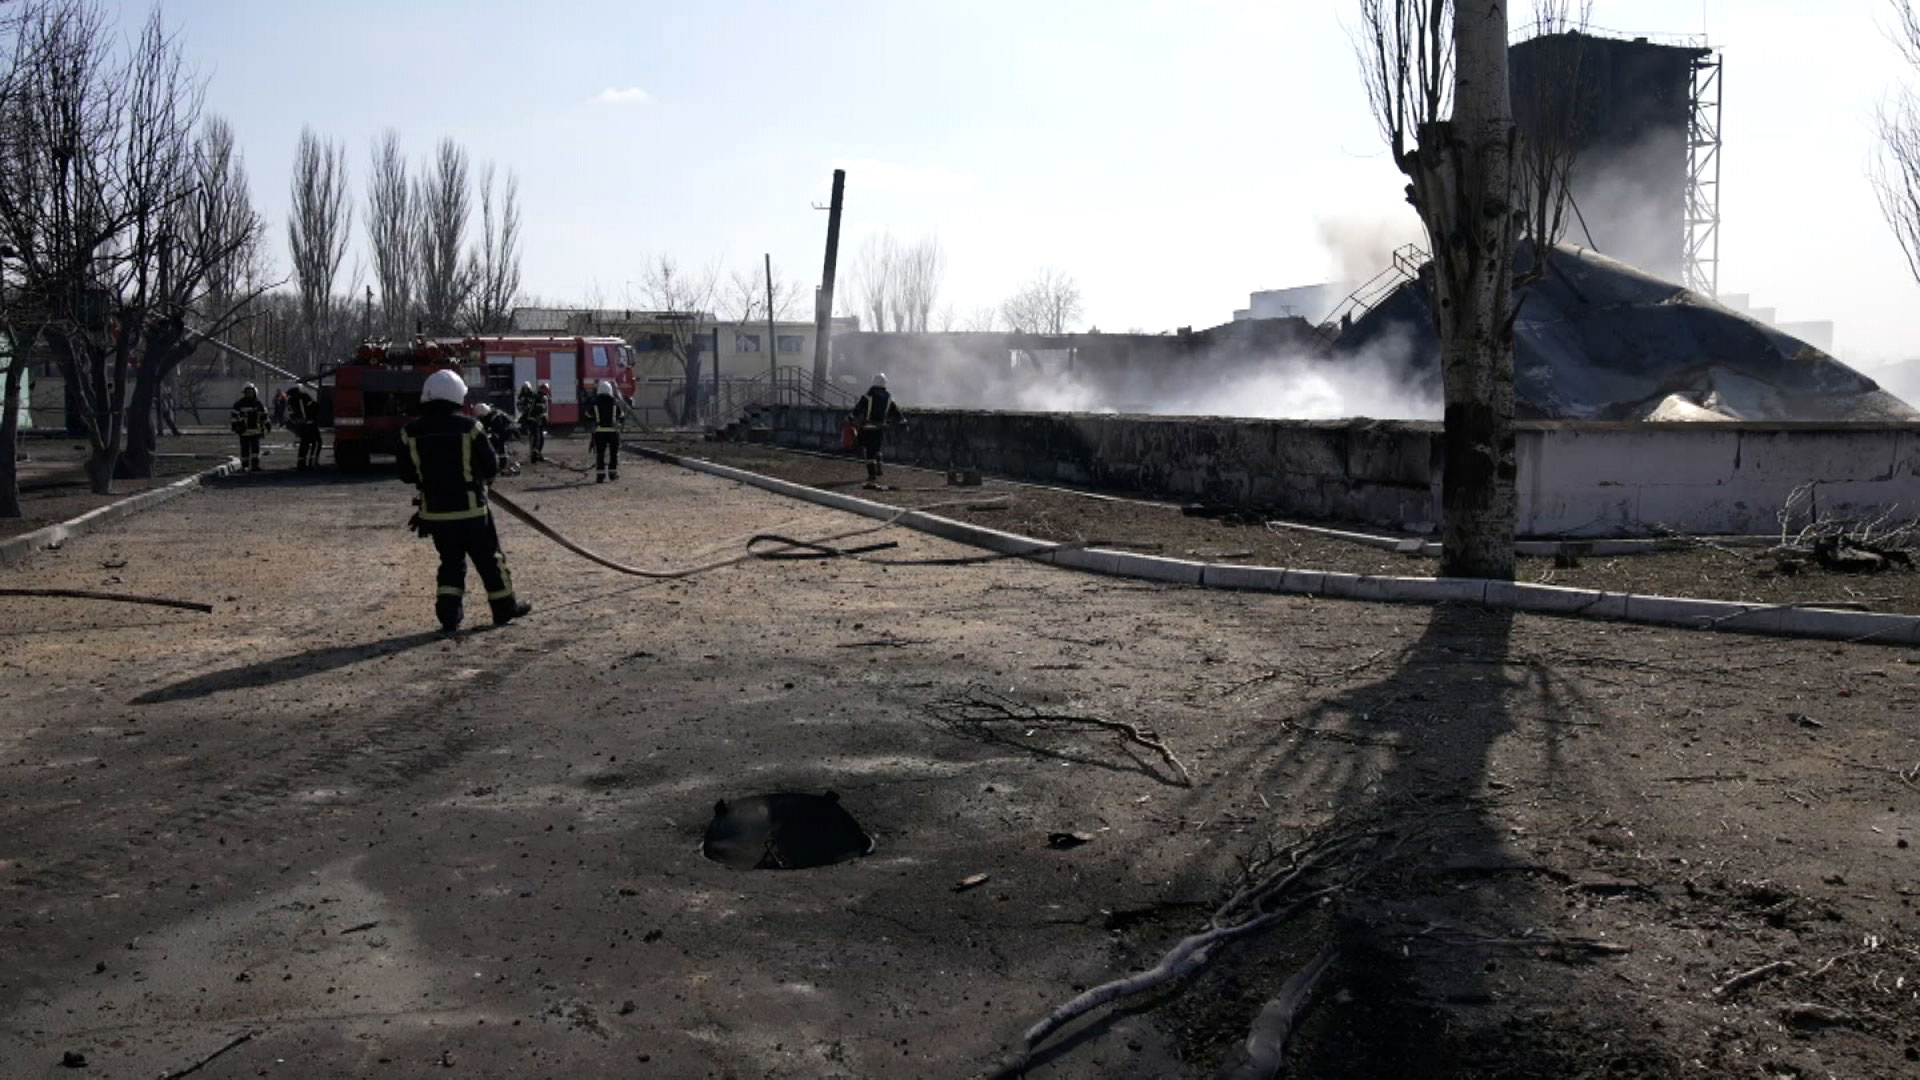 The Ukrainian city of Mykolaiv is picking up the pieces after a weekend of heavy fighting.